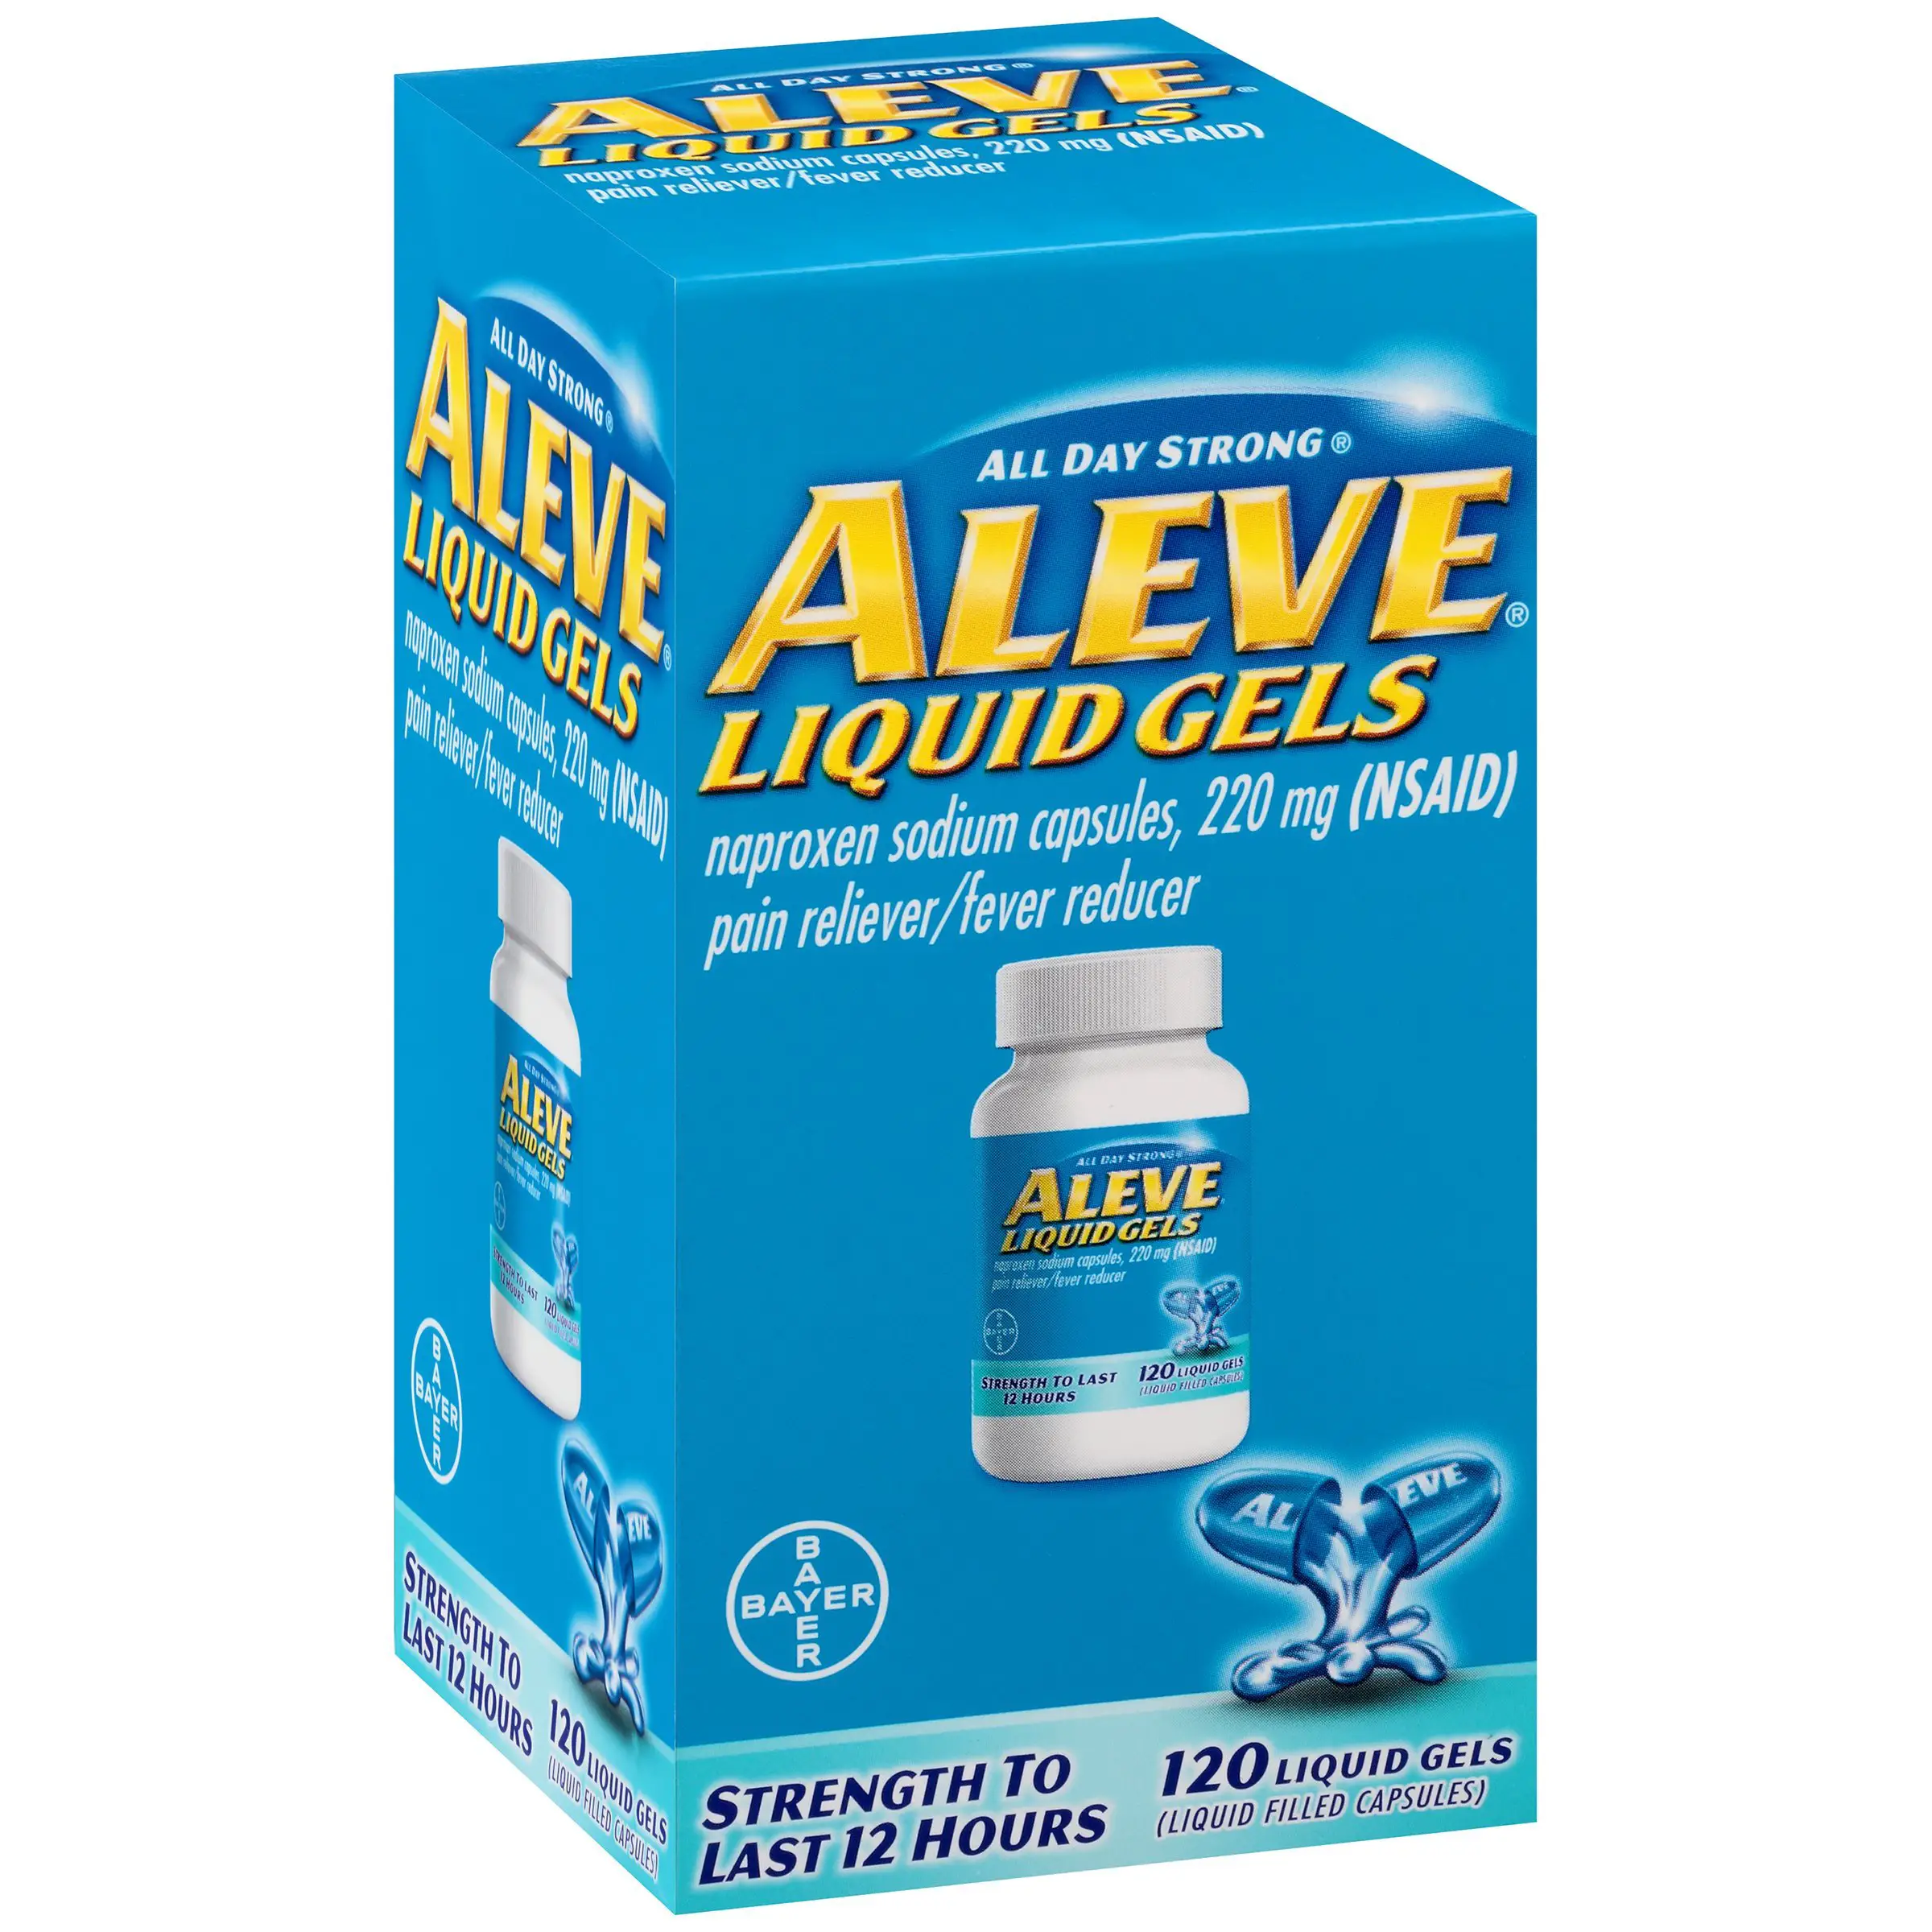 Aleve Liquid Gels with Naproxen Sodium, 220mg (NSAID) Pain ...